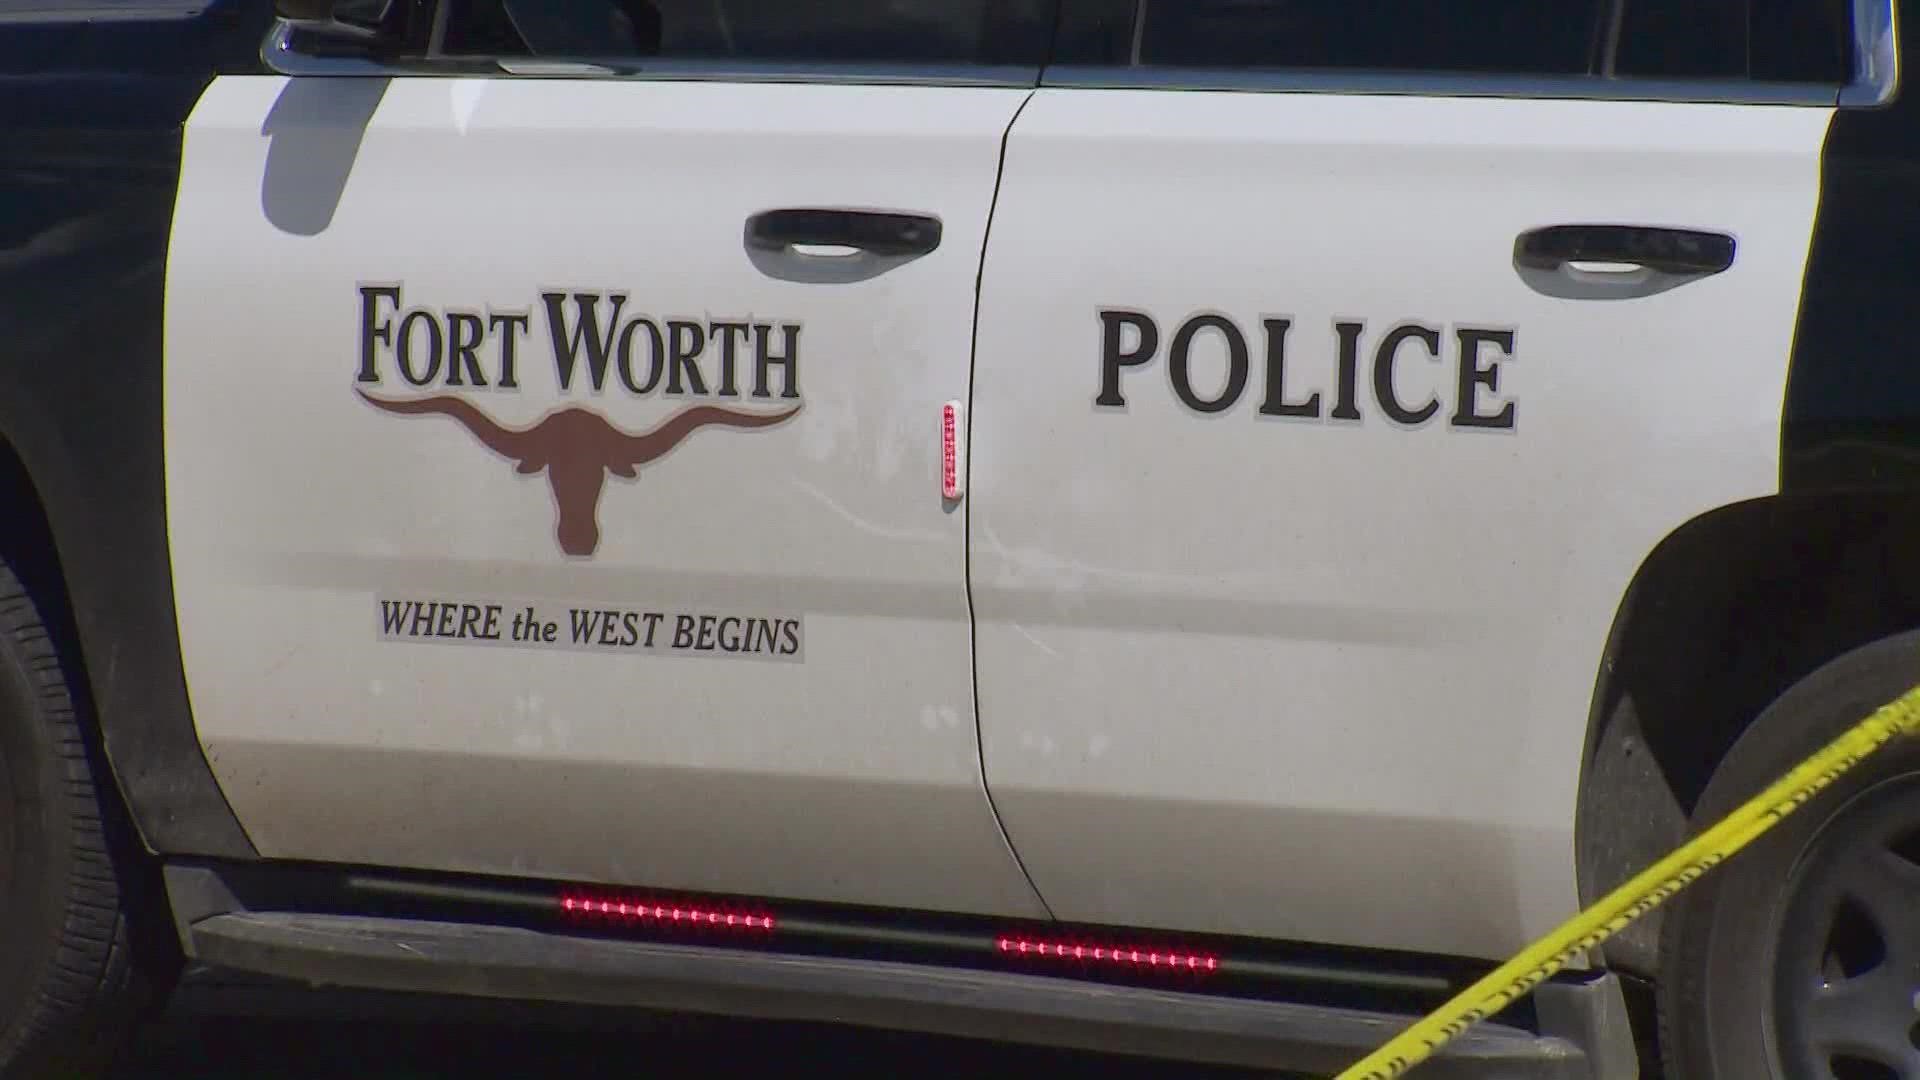 A new 96-page report presented to council members in Fort Worth Tuesday outlined issues the police department is still dealing with.